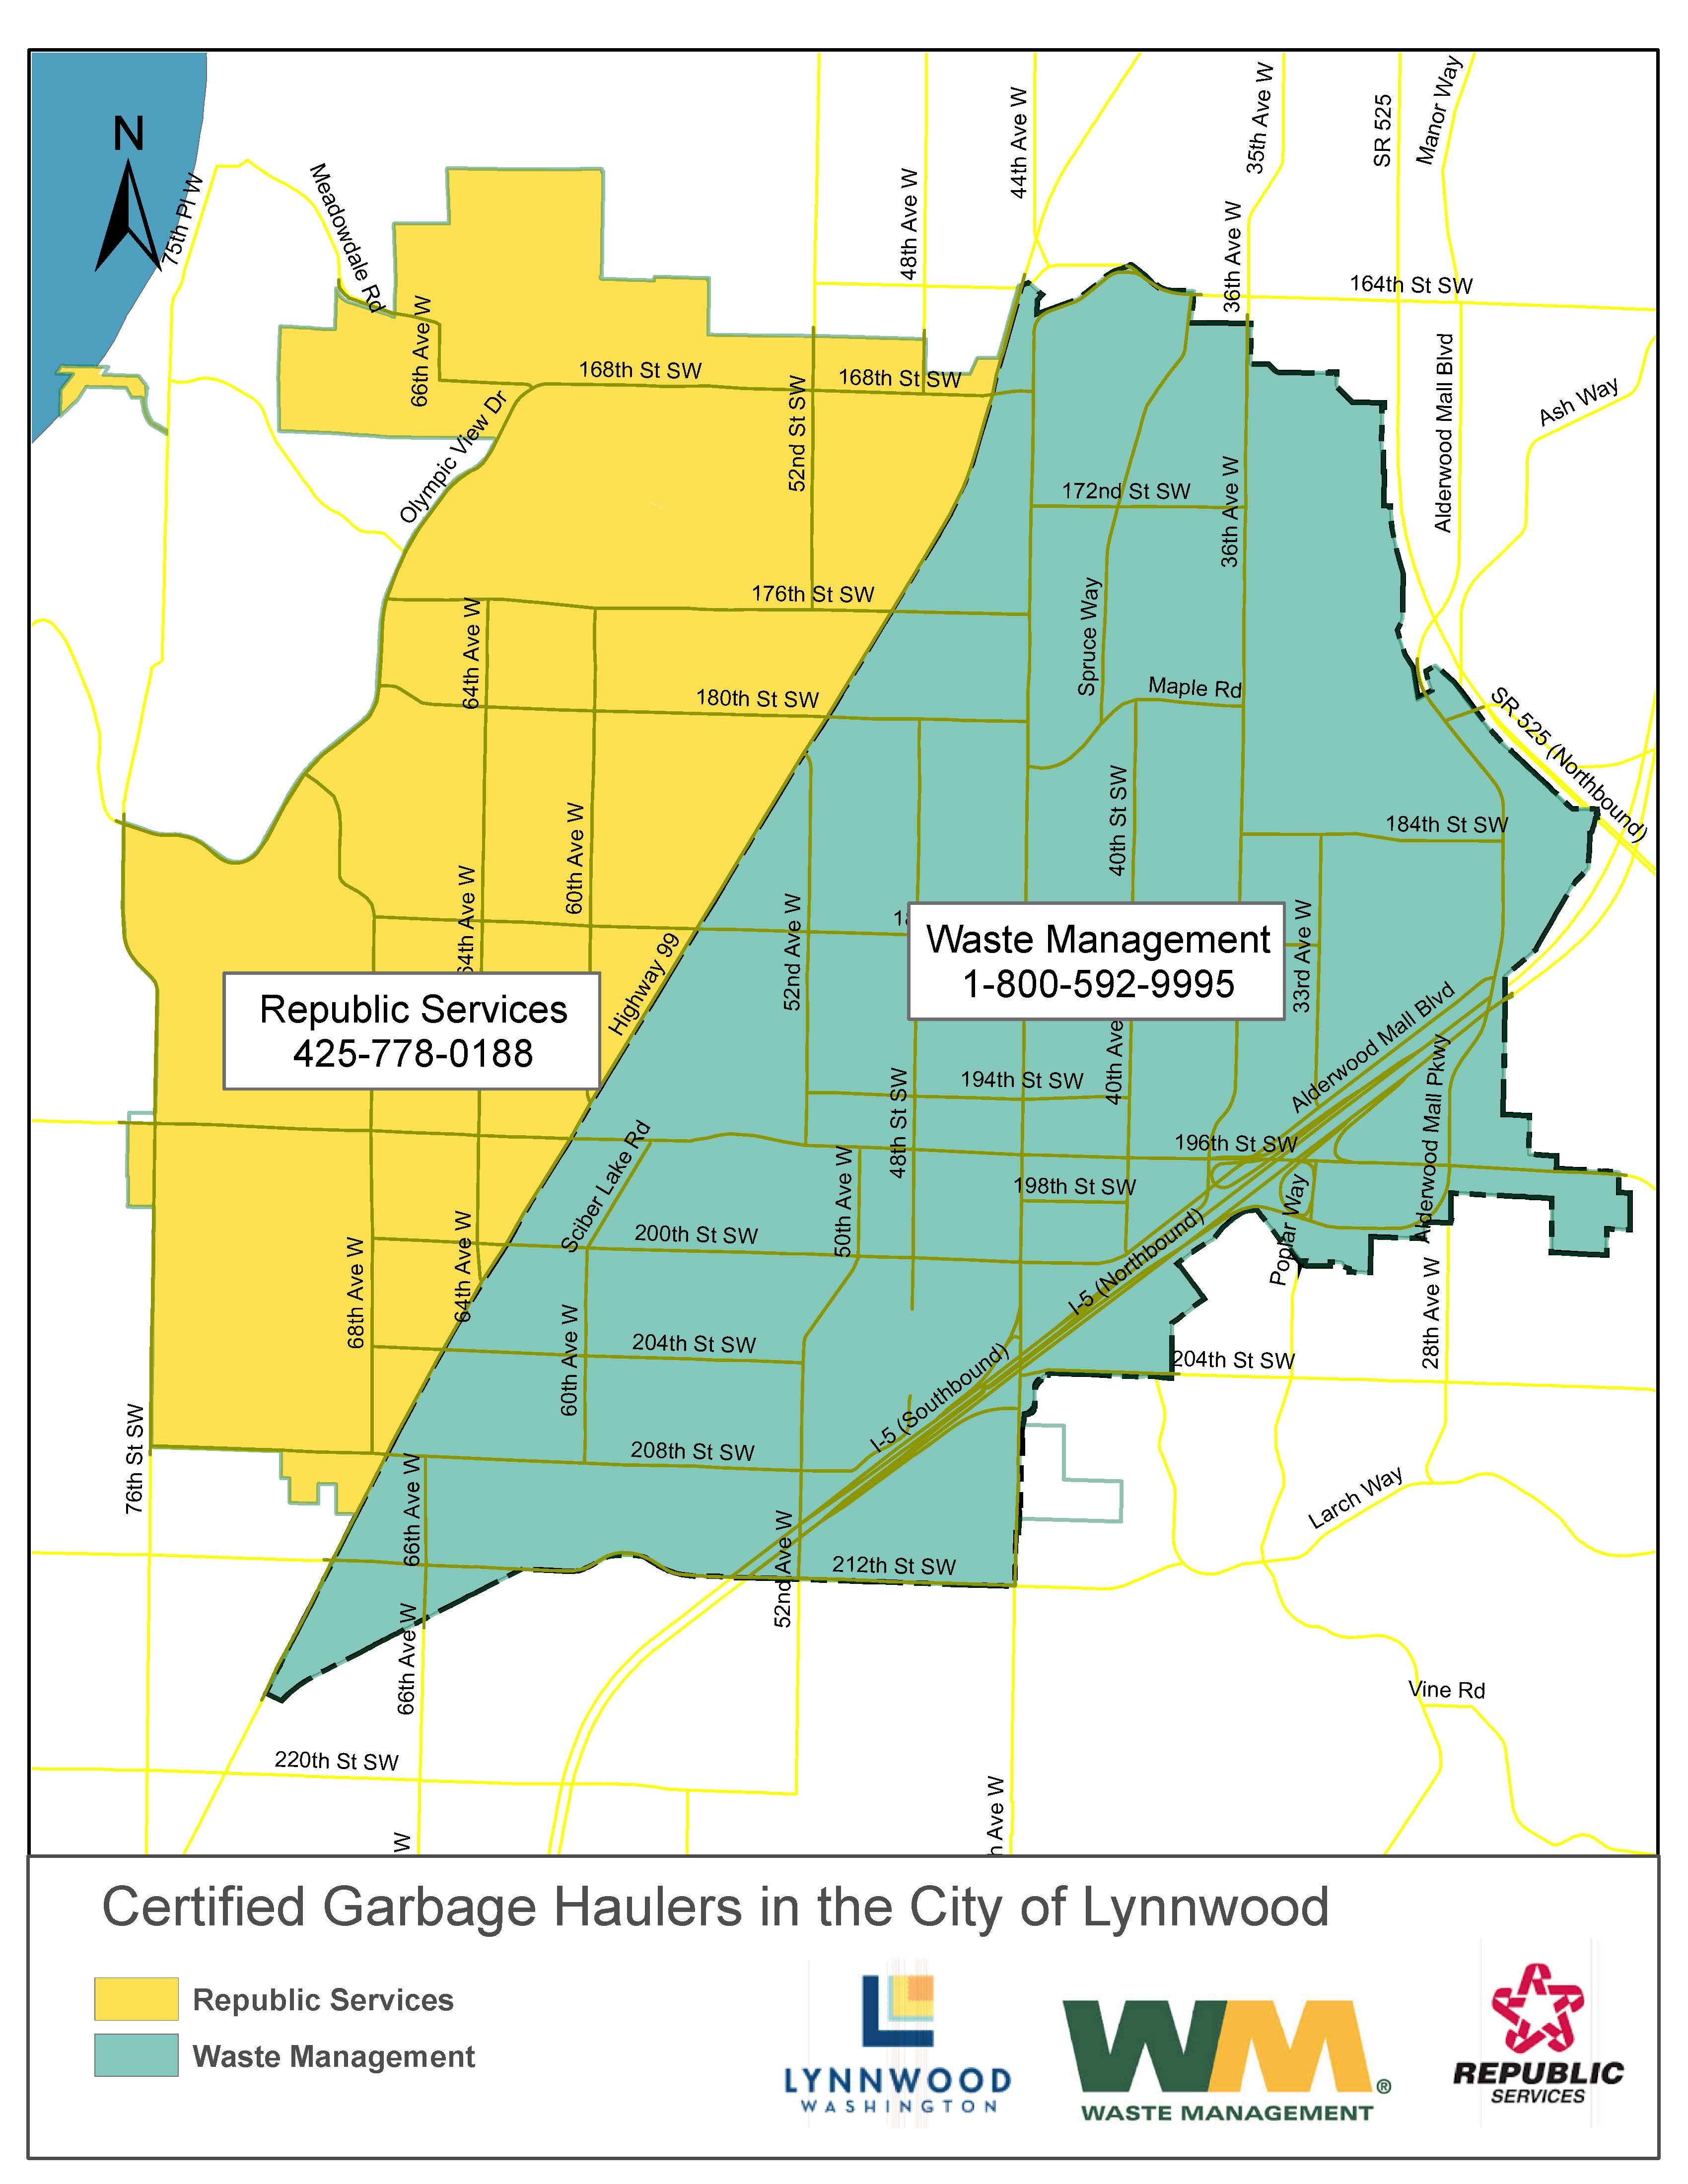 Map of what areas of Lynnwood are serviced by specific haulers.